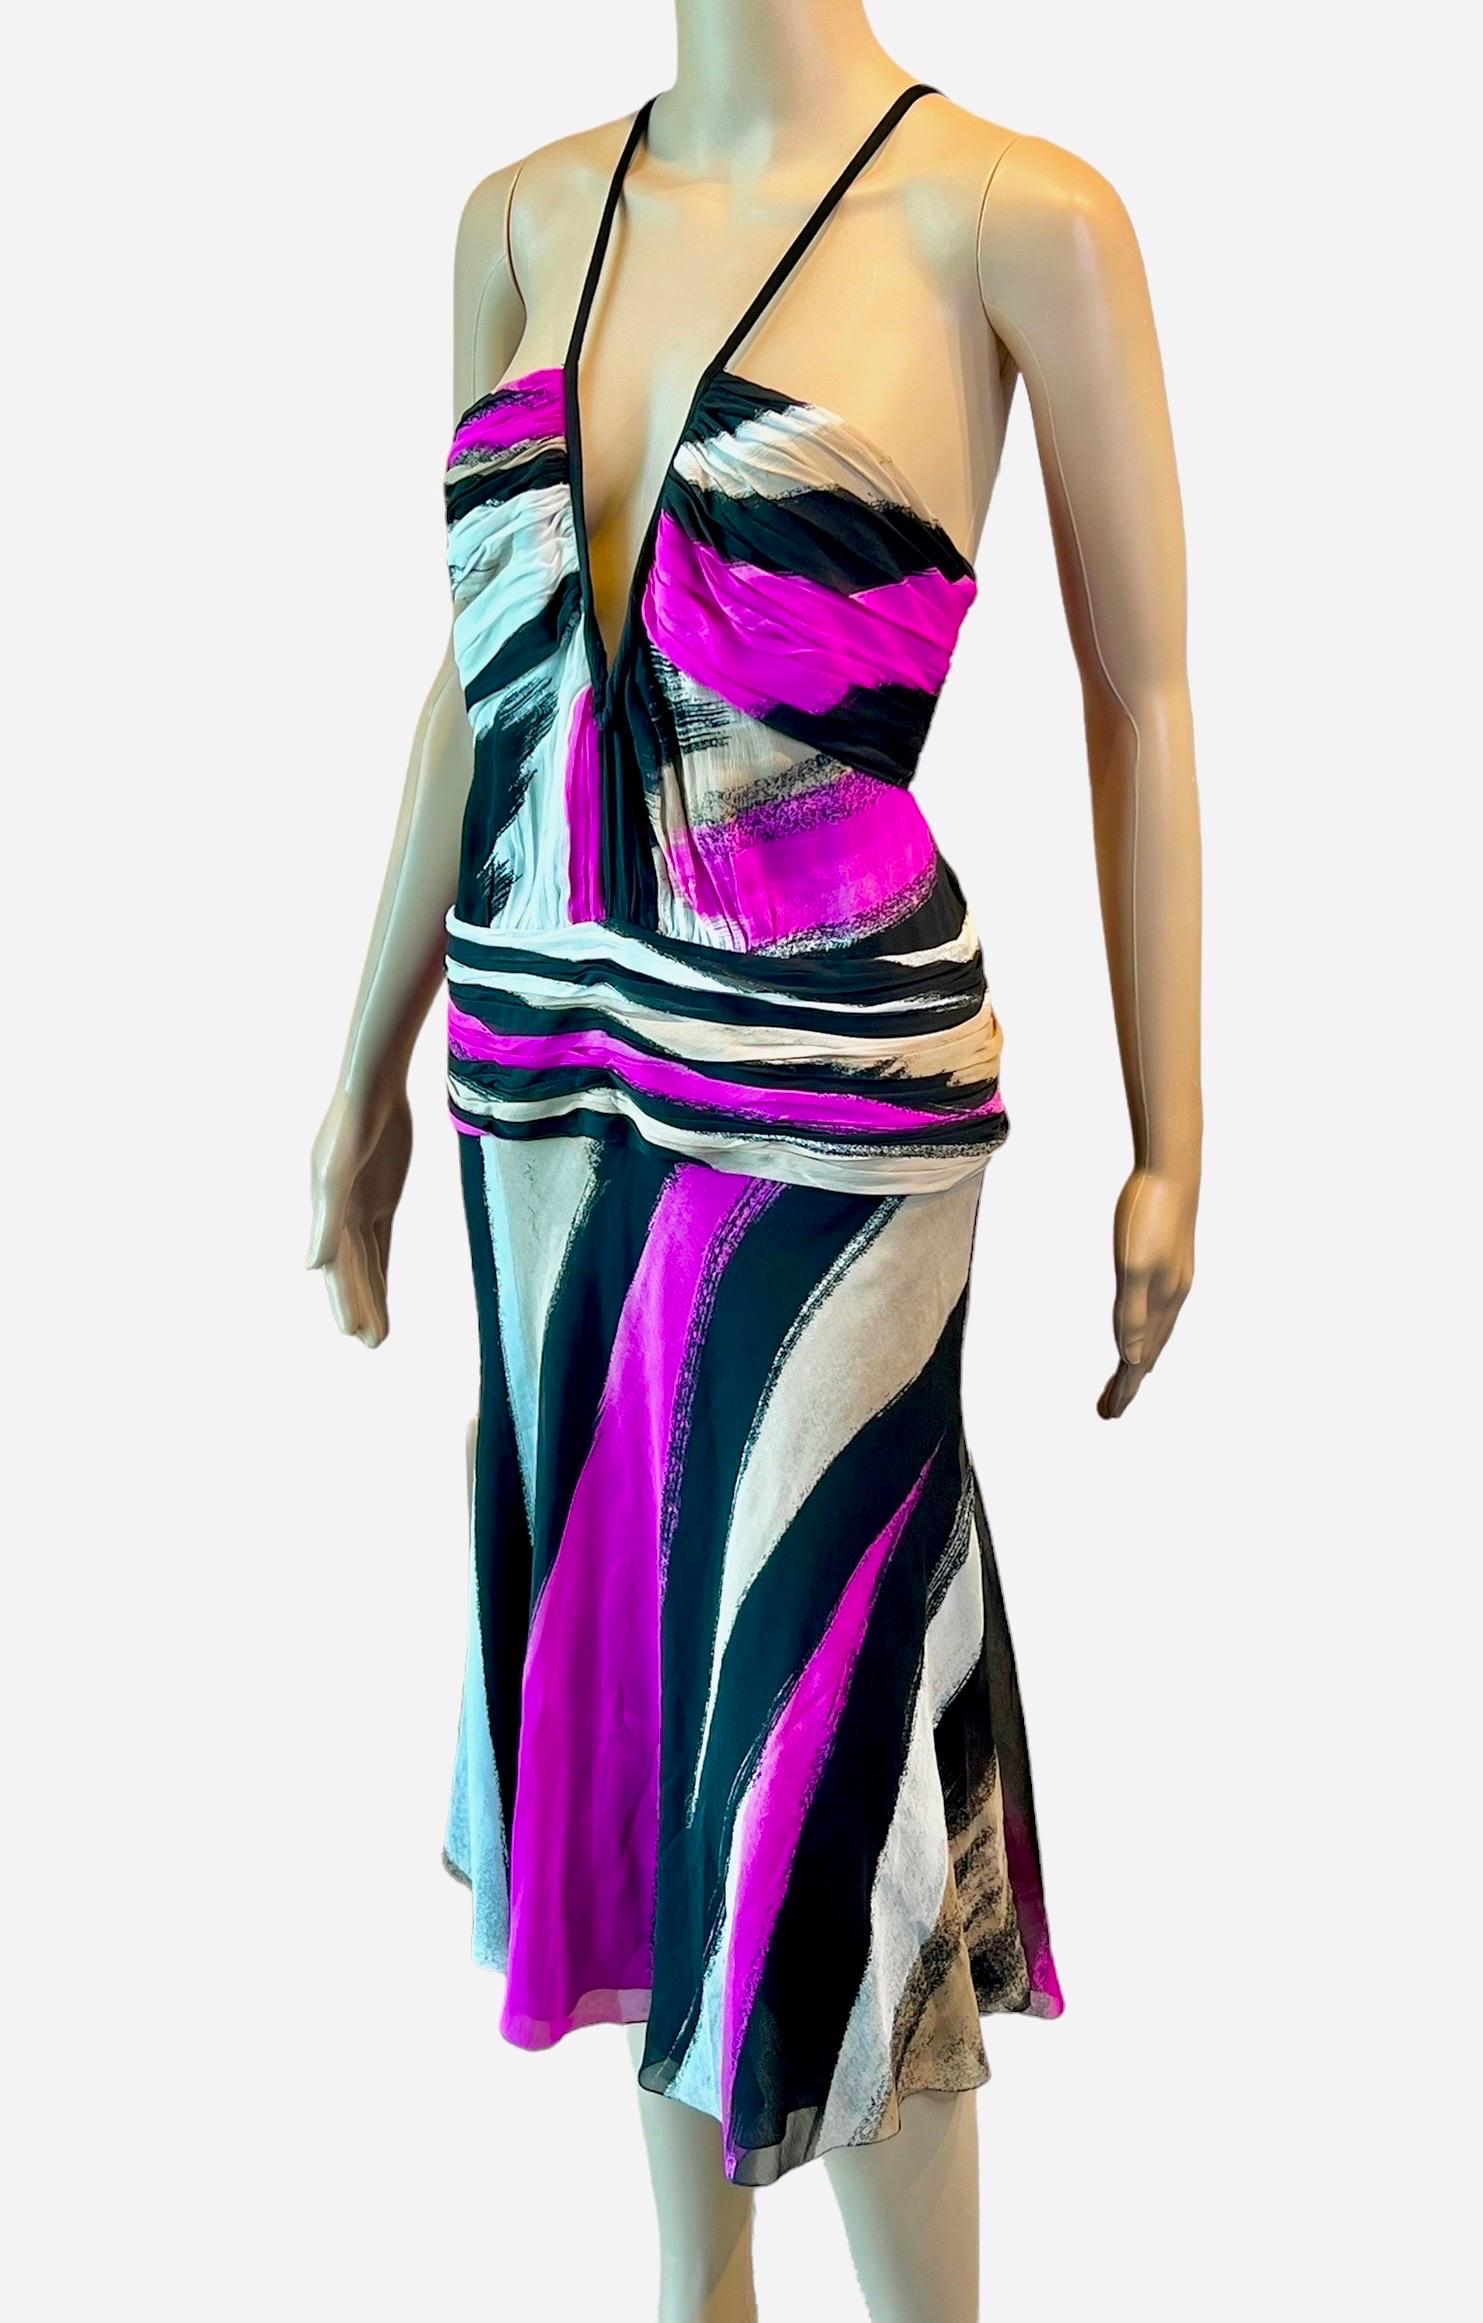 Gianni Versace F/W 2001 Runway Plunging Neckline Geometric Abstract Print Dress IT 44

Look 46 from the Fall 2001 Collection. 

Featured in the Fall 2001 Campaign.